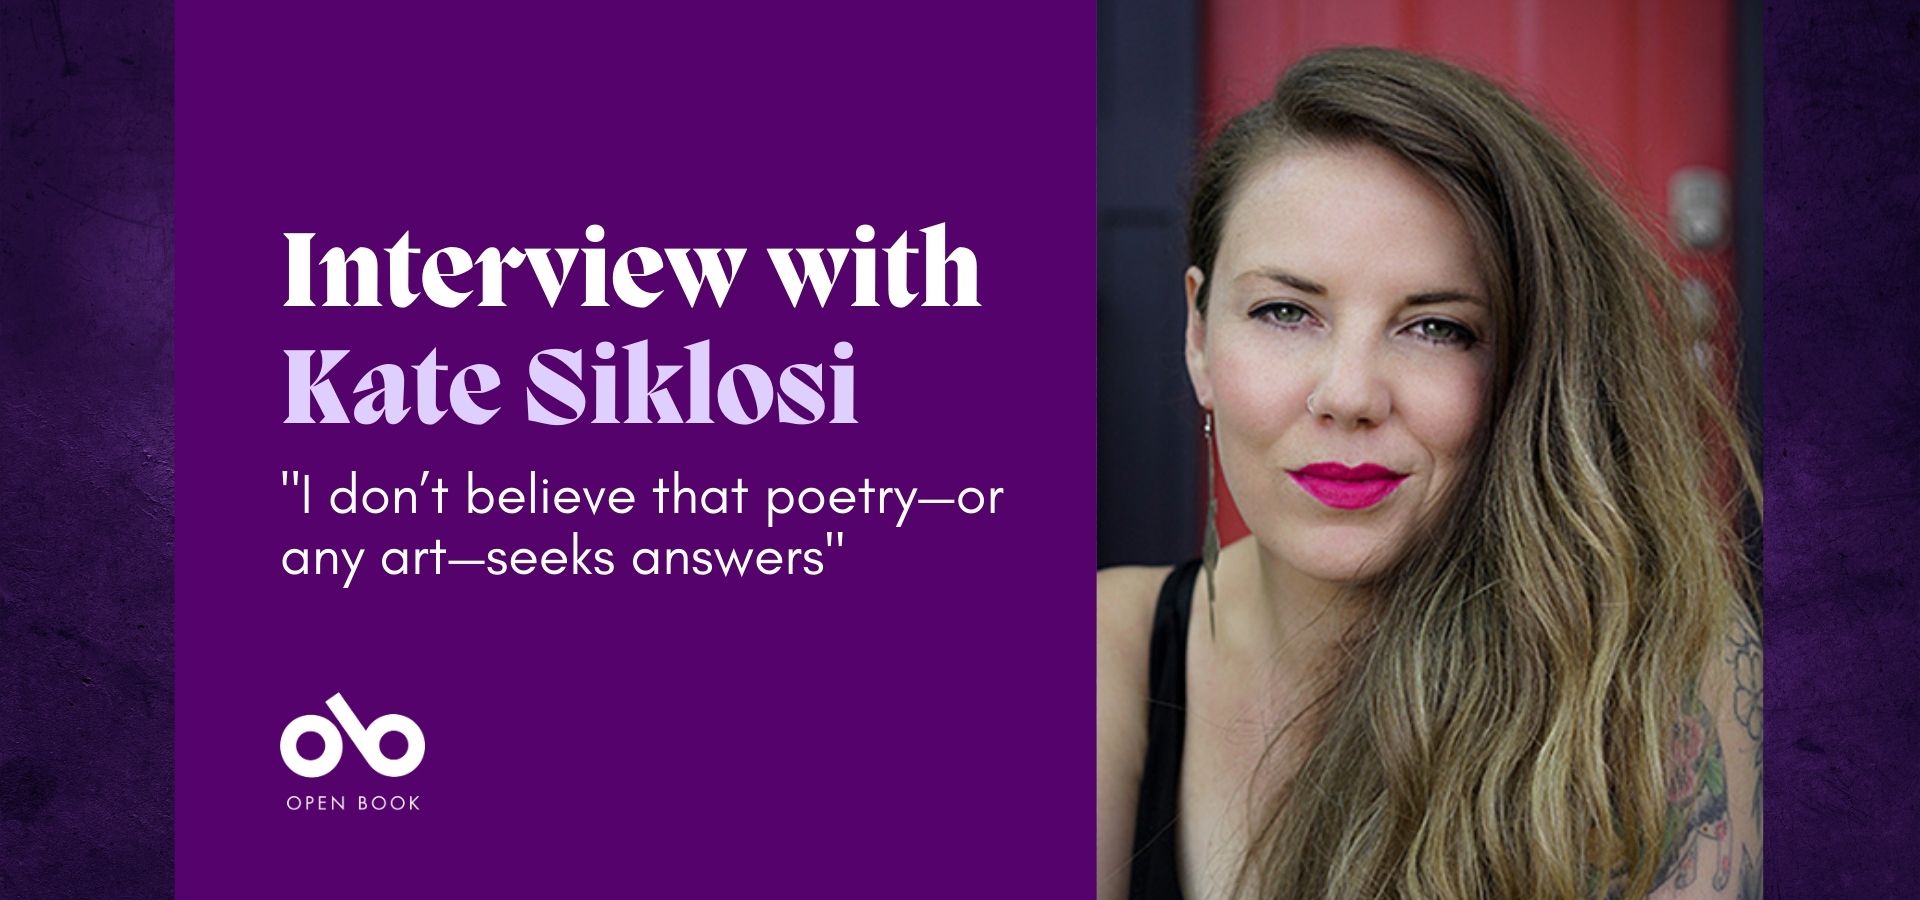 purple banner image with photo of poet Kate Siklosi and text reading "Interview with Kate Siklosi. I don't believe that poetry-or any art-seeks answers"